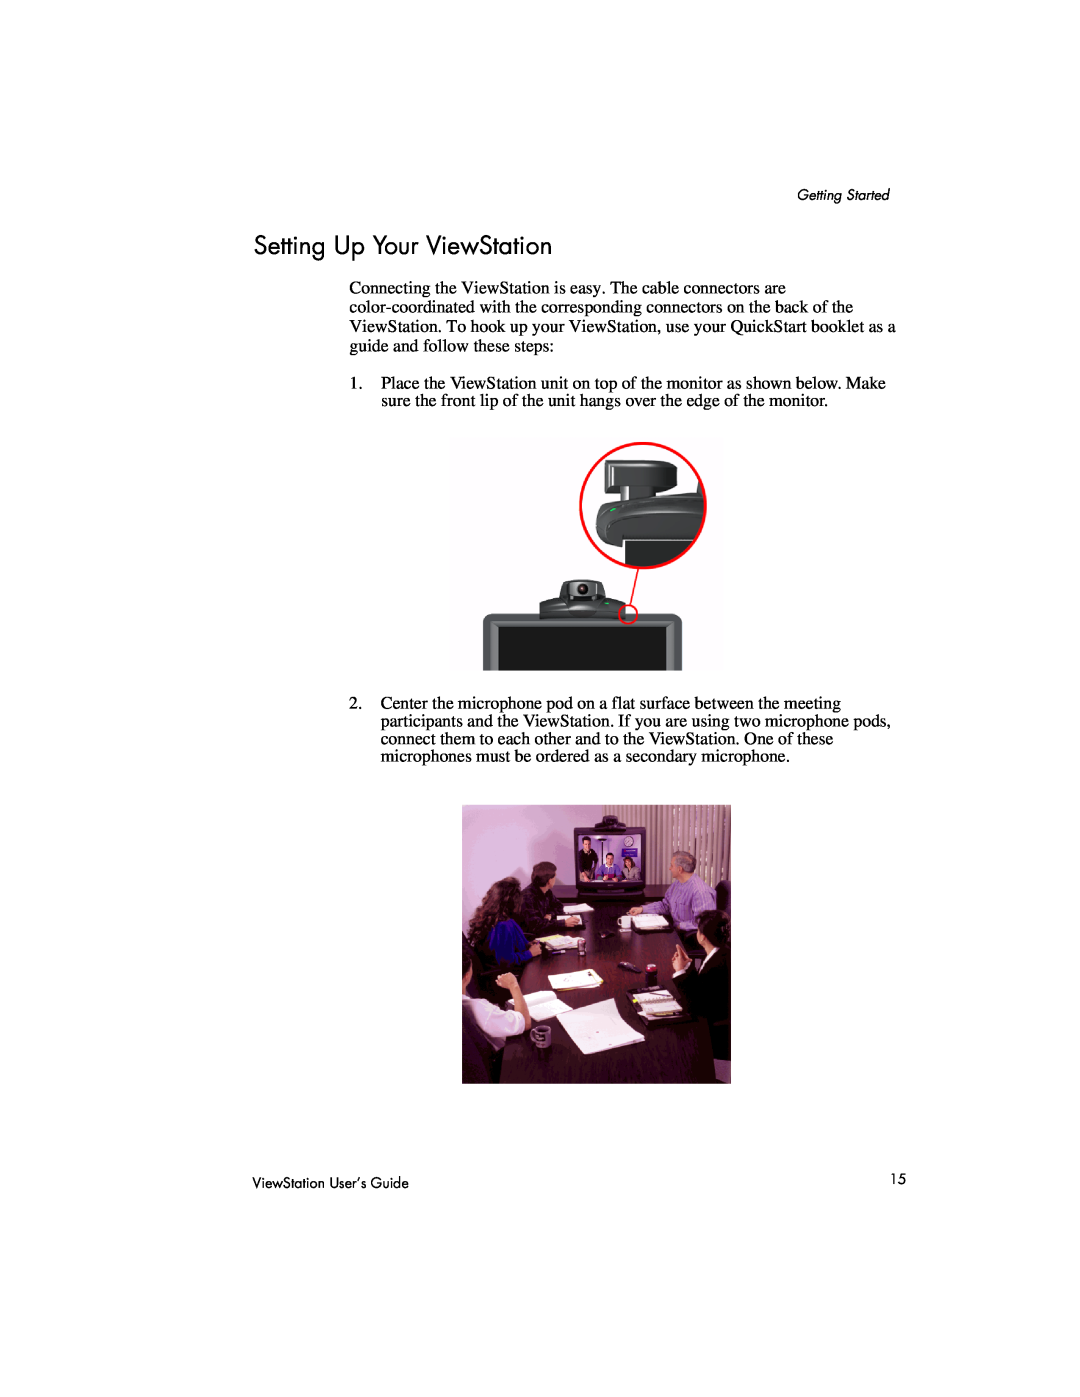 Polycom 128, 512, MP manual Setting Up Your ViewStation 